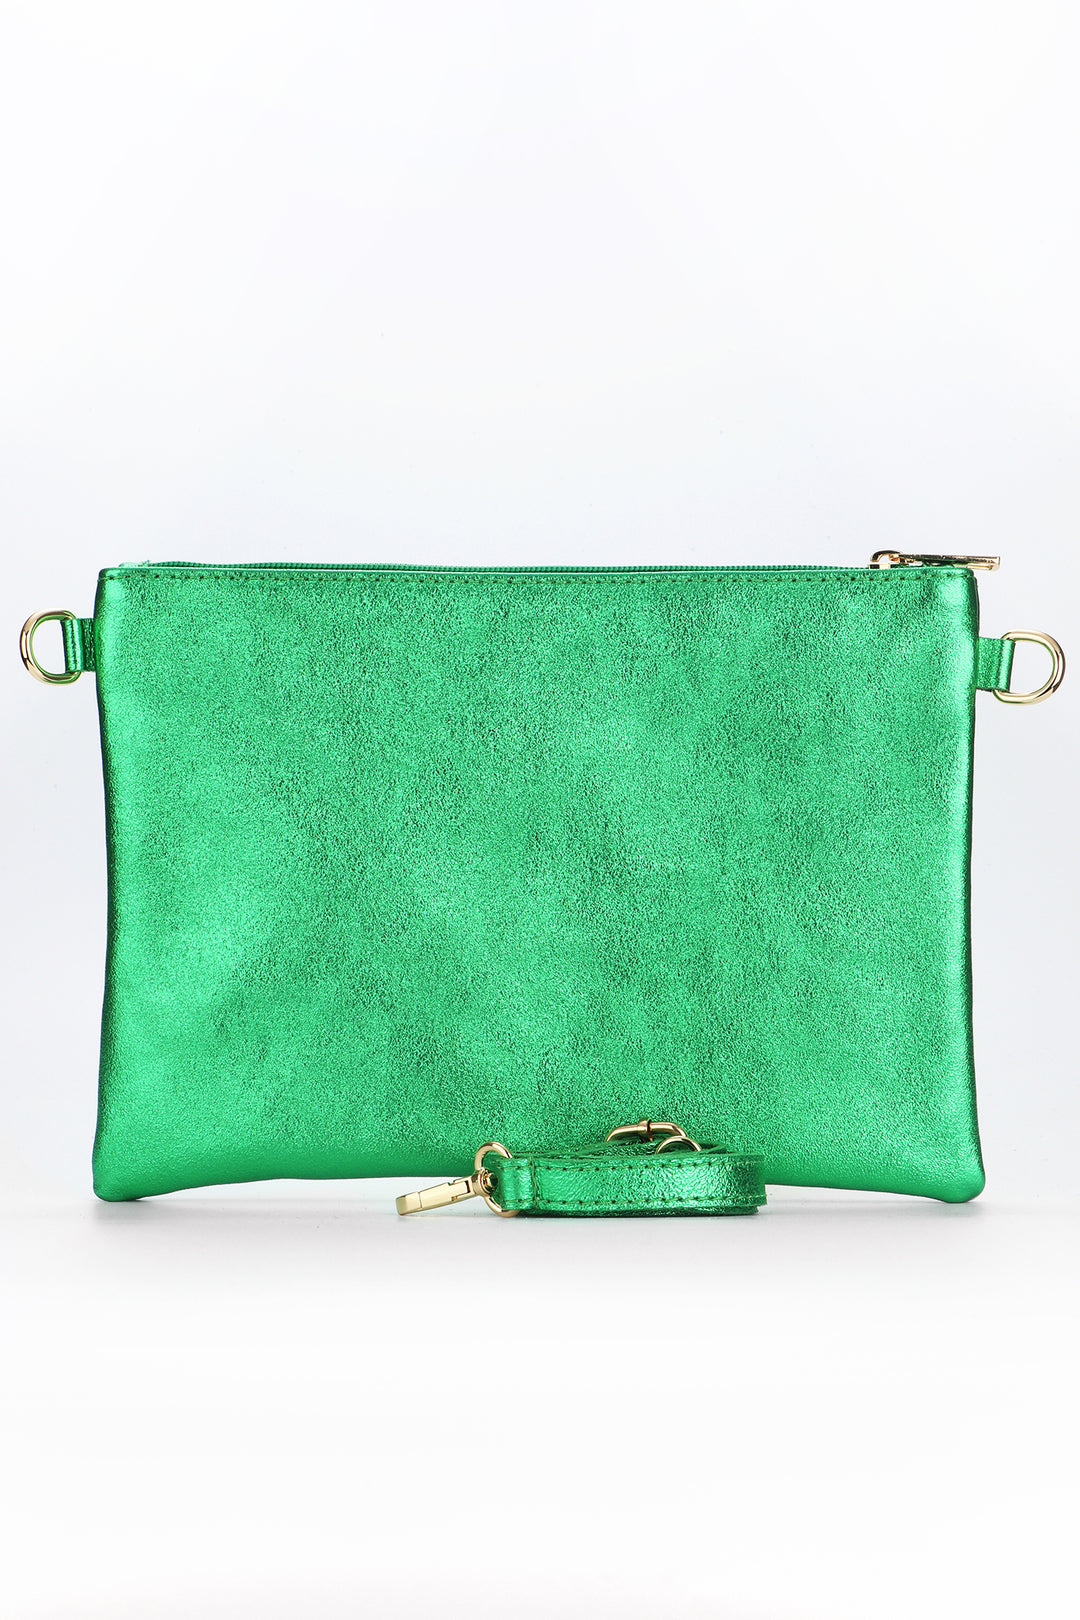 showing the back of the wristlet bag which is plain green 